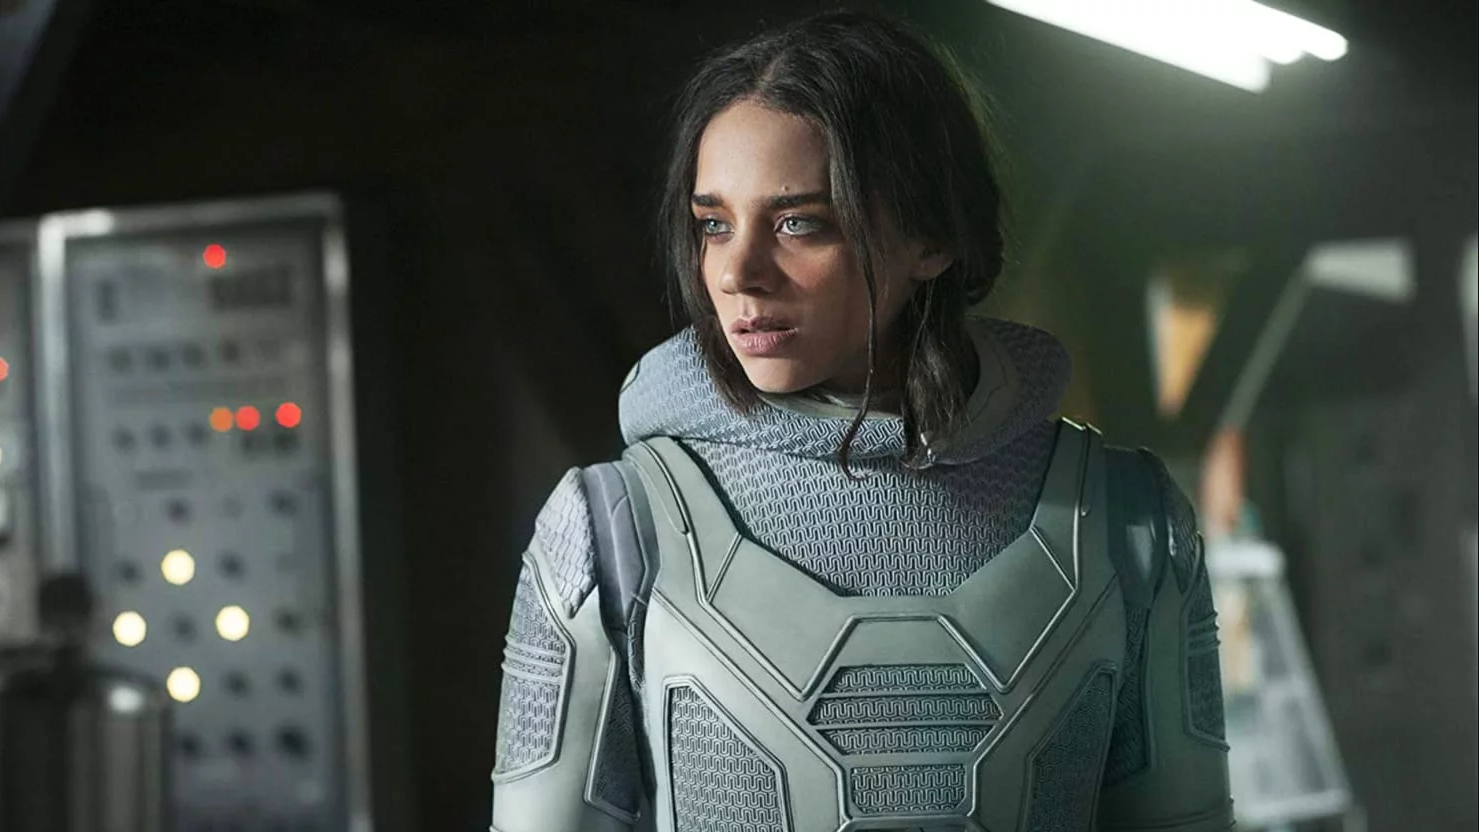 Marvel’s ‘Ant-Man and the Wasp’ and Hollywood’s Misunderstanding of Disability